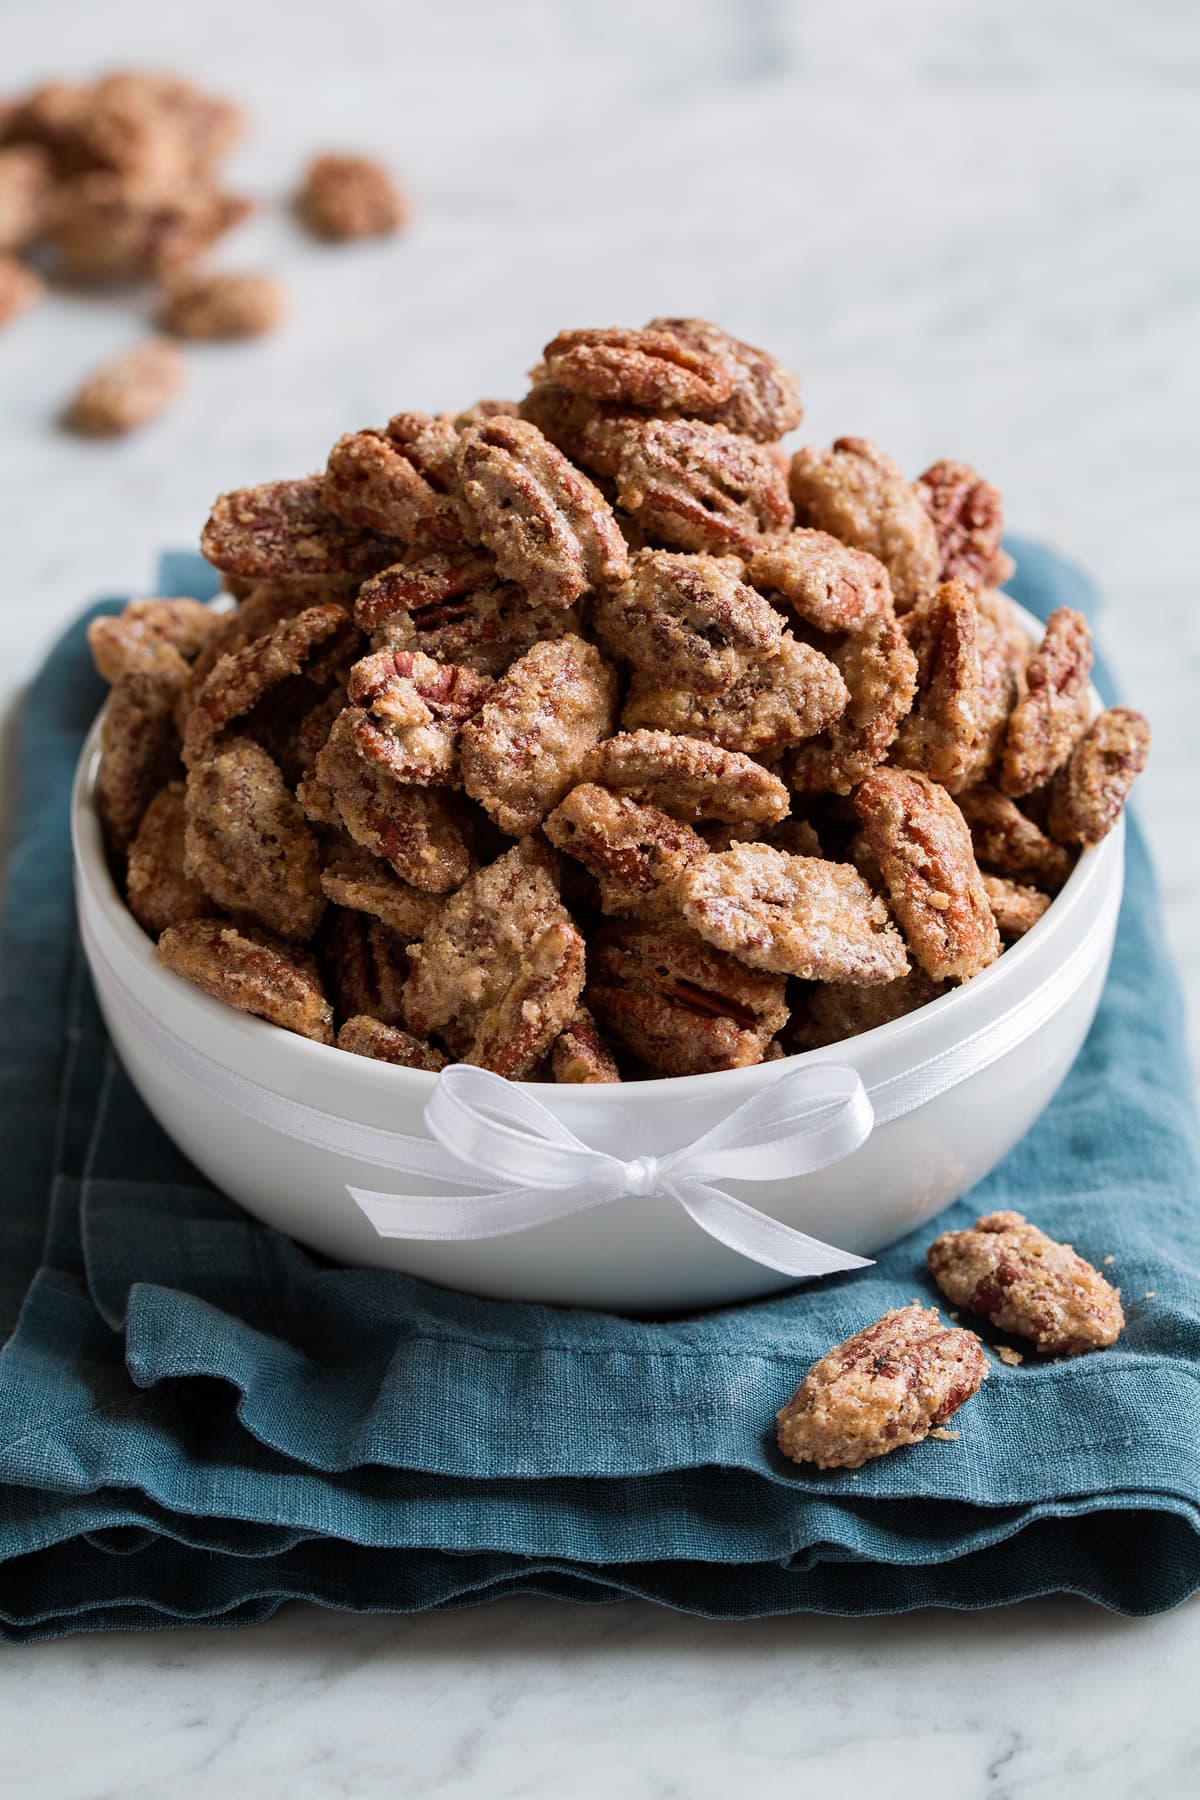 Candied pecans mounded high in a white bowl set over a blue cloth.